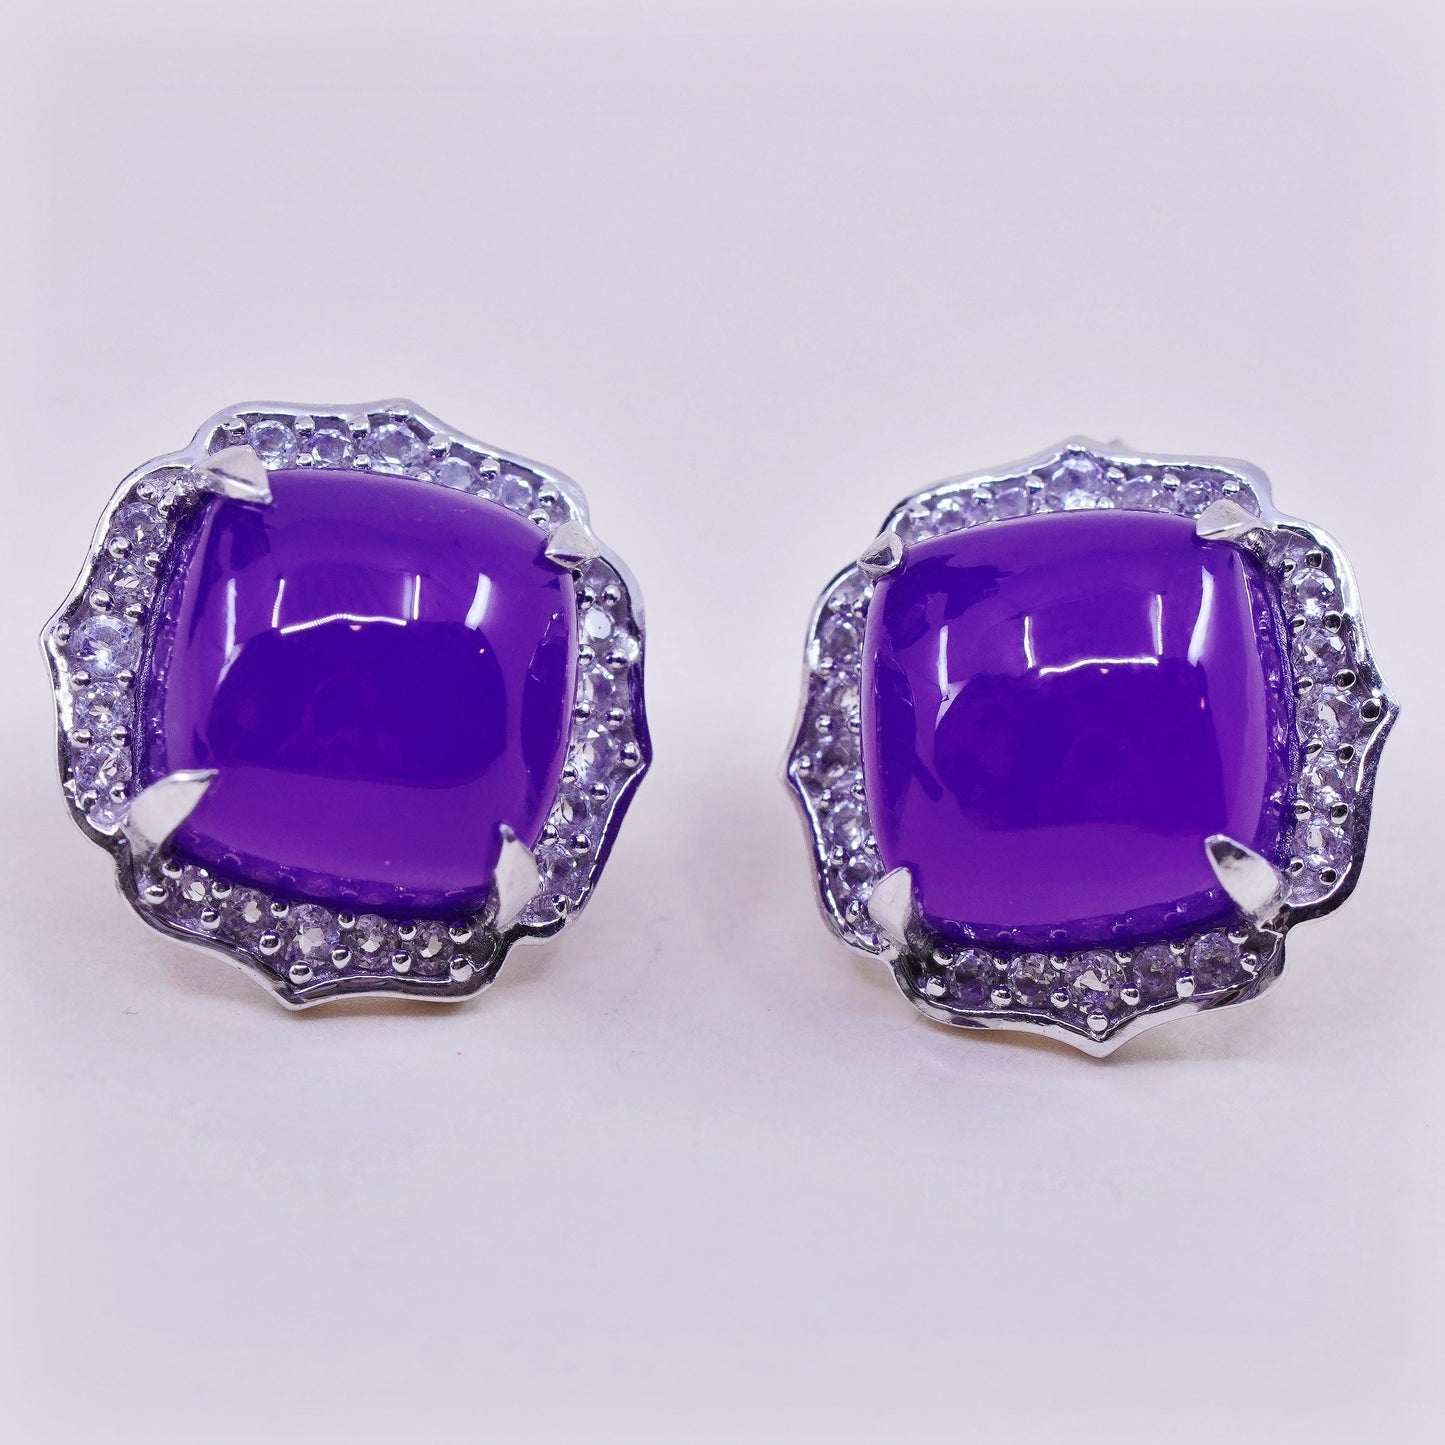 Vintage sterling silver handmade earrings, 925 studs with amethyst and diamond